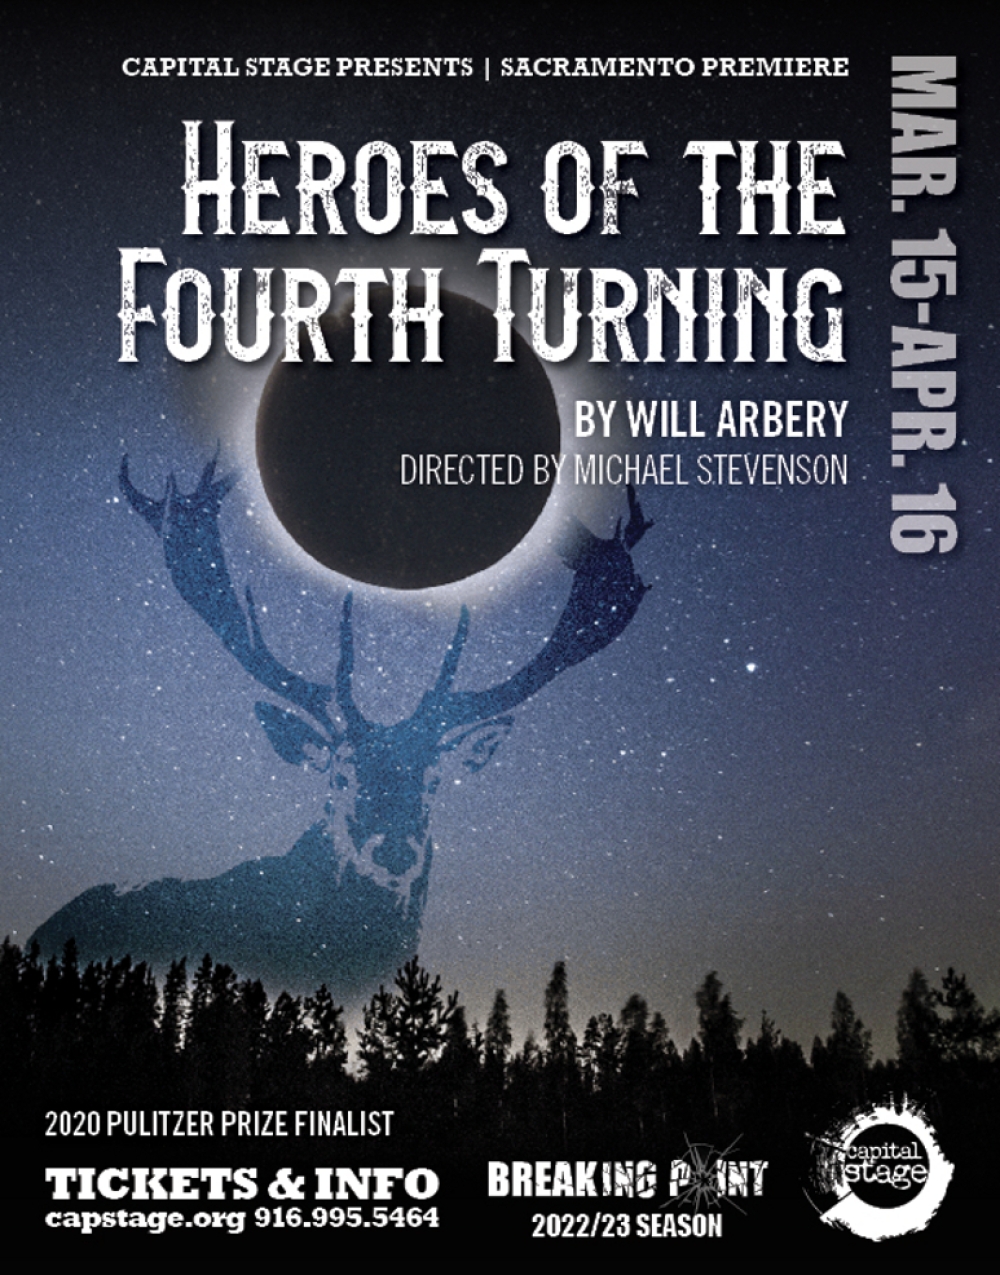 Heroes of the Fourth Turning at Capital Stage